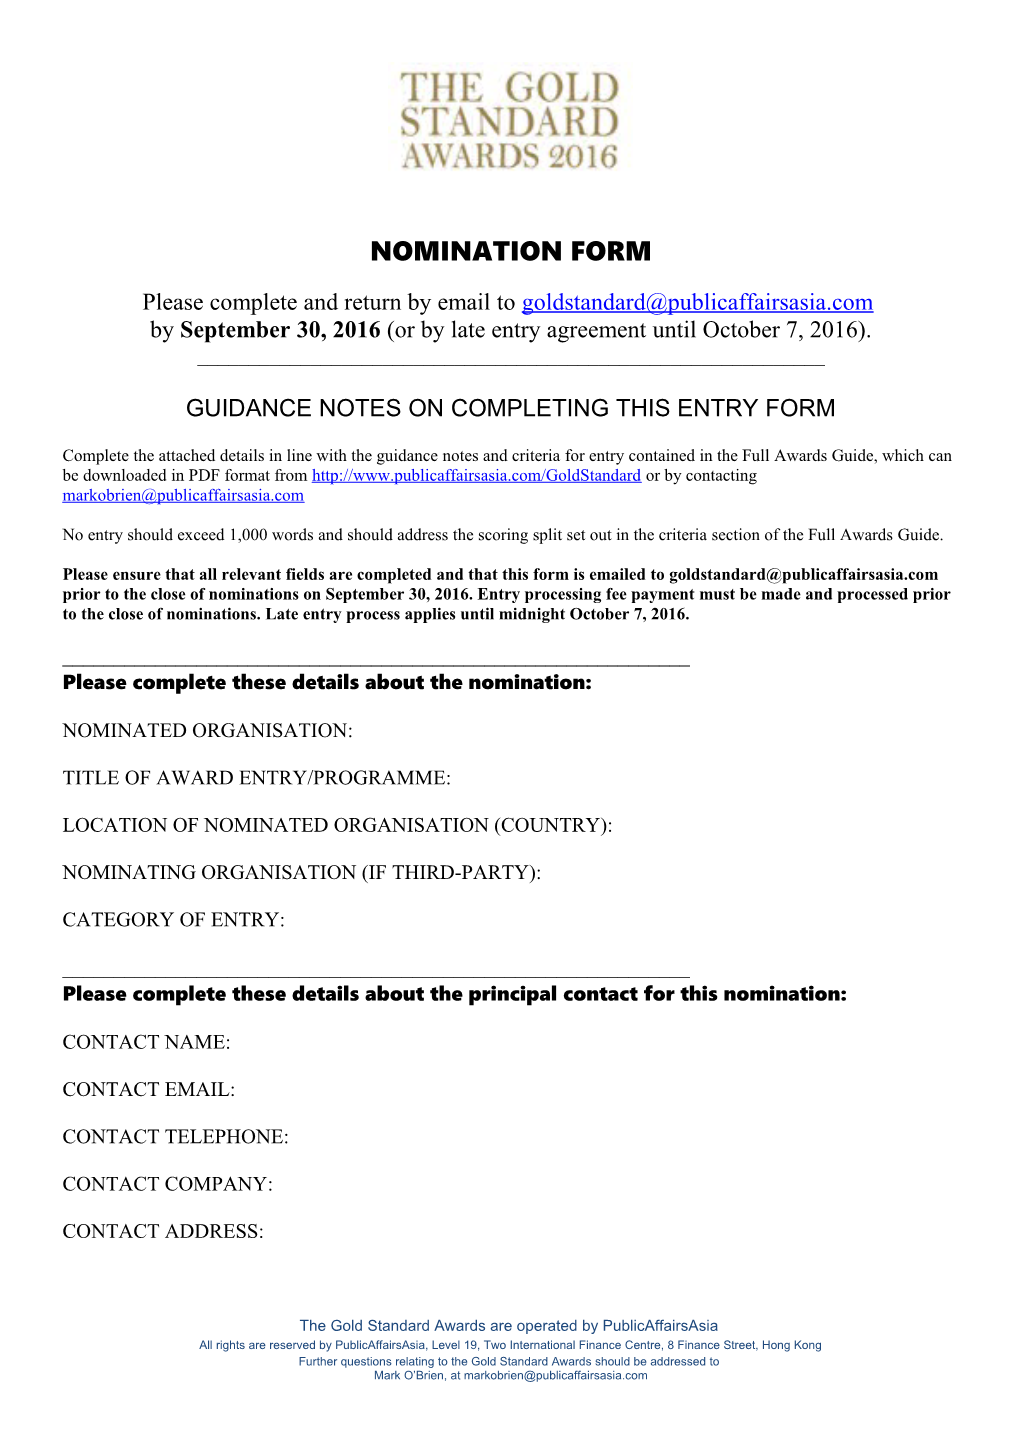 Guidance Notes on Completing This Entry Form